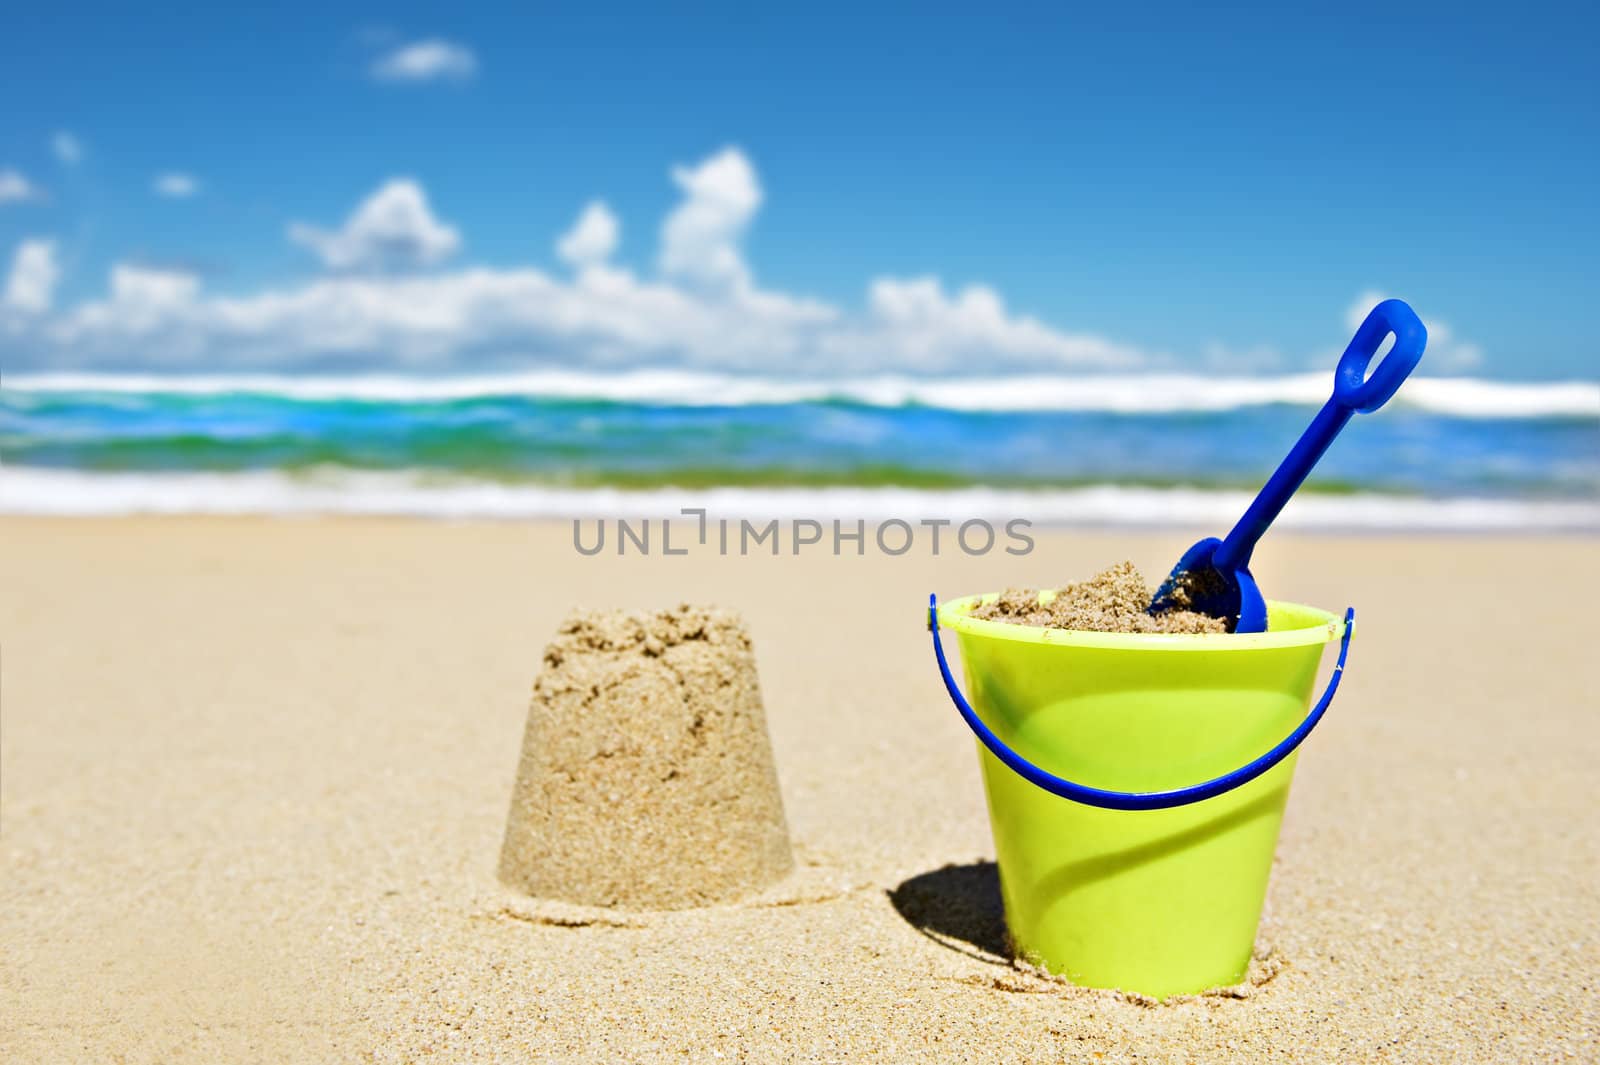 Toy bucket and shovel on the beach by tish1